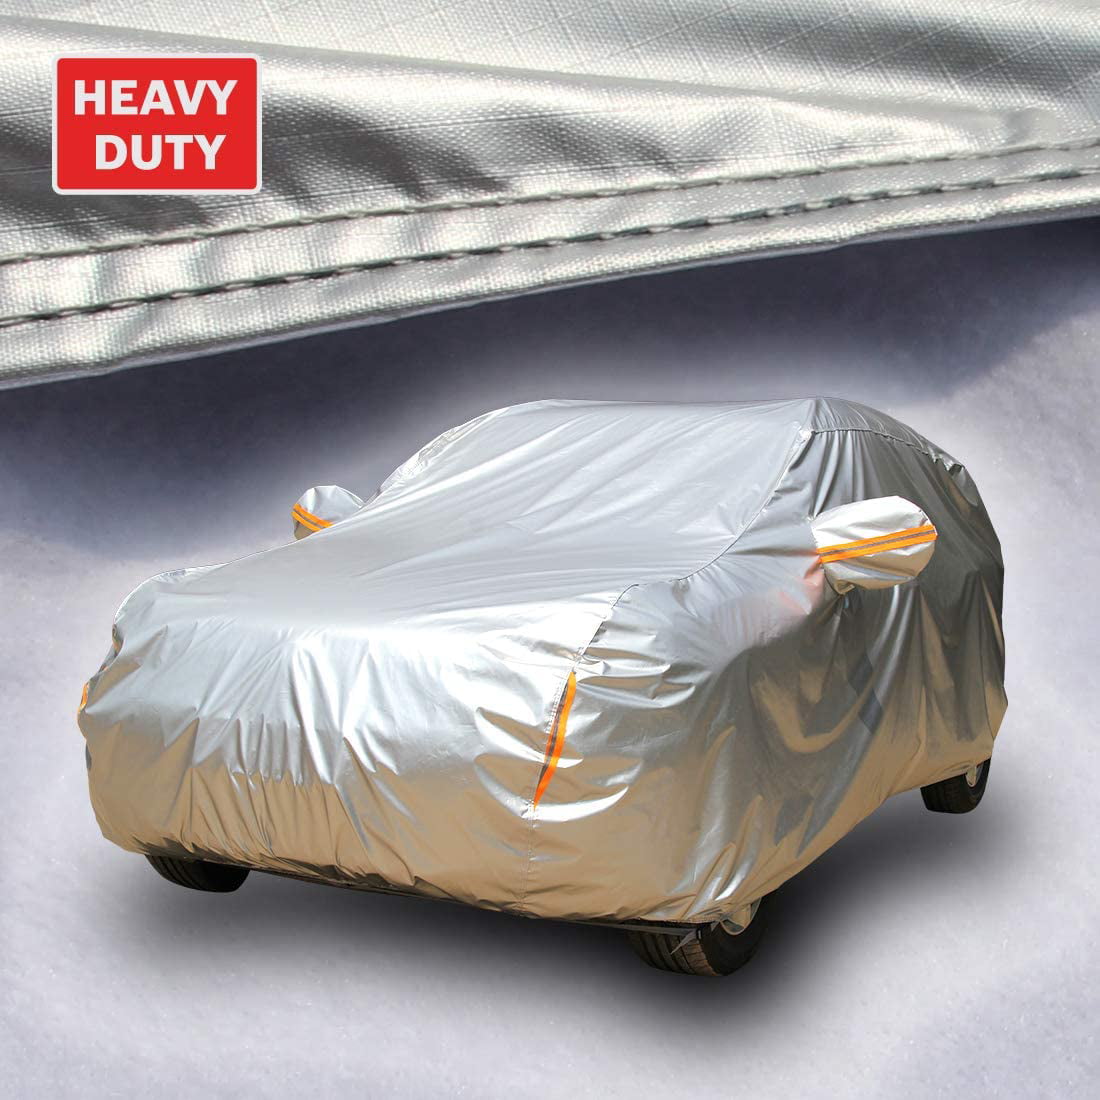 BMW 320i HEAVY DUTY FULLY WATERPROOF CAR COVER COTTON LINED 